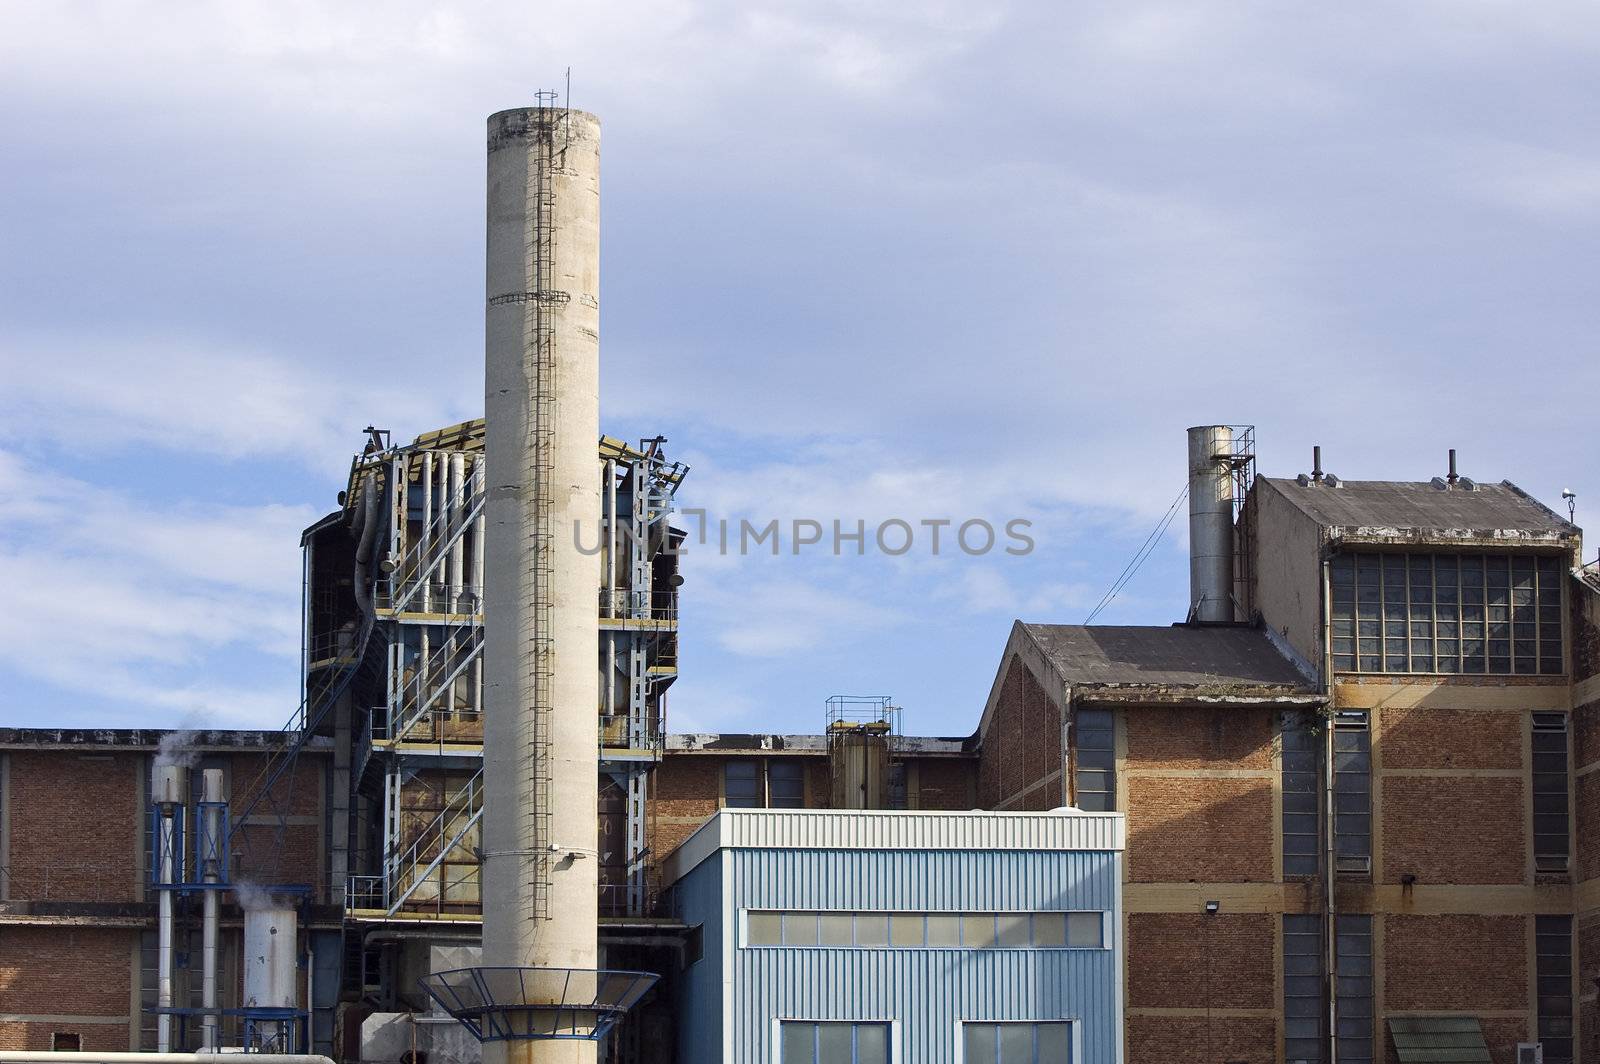 Detail of an industrial plant with a chimney